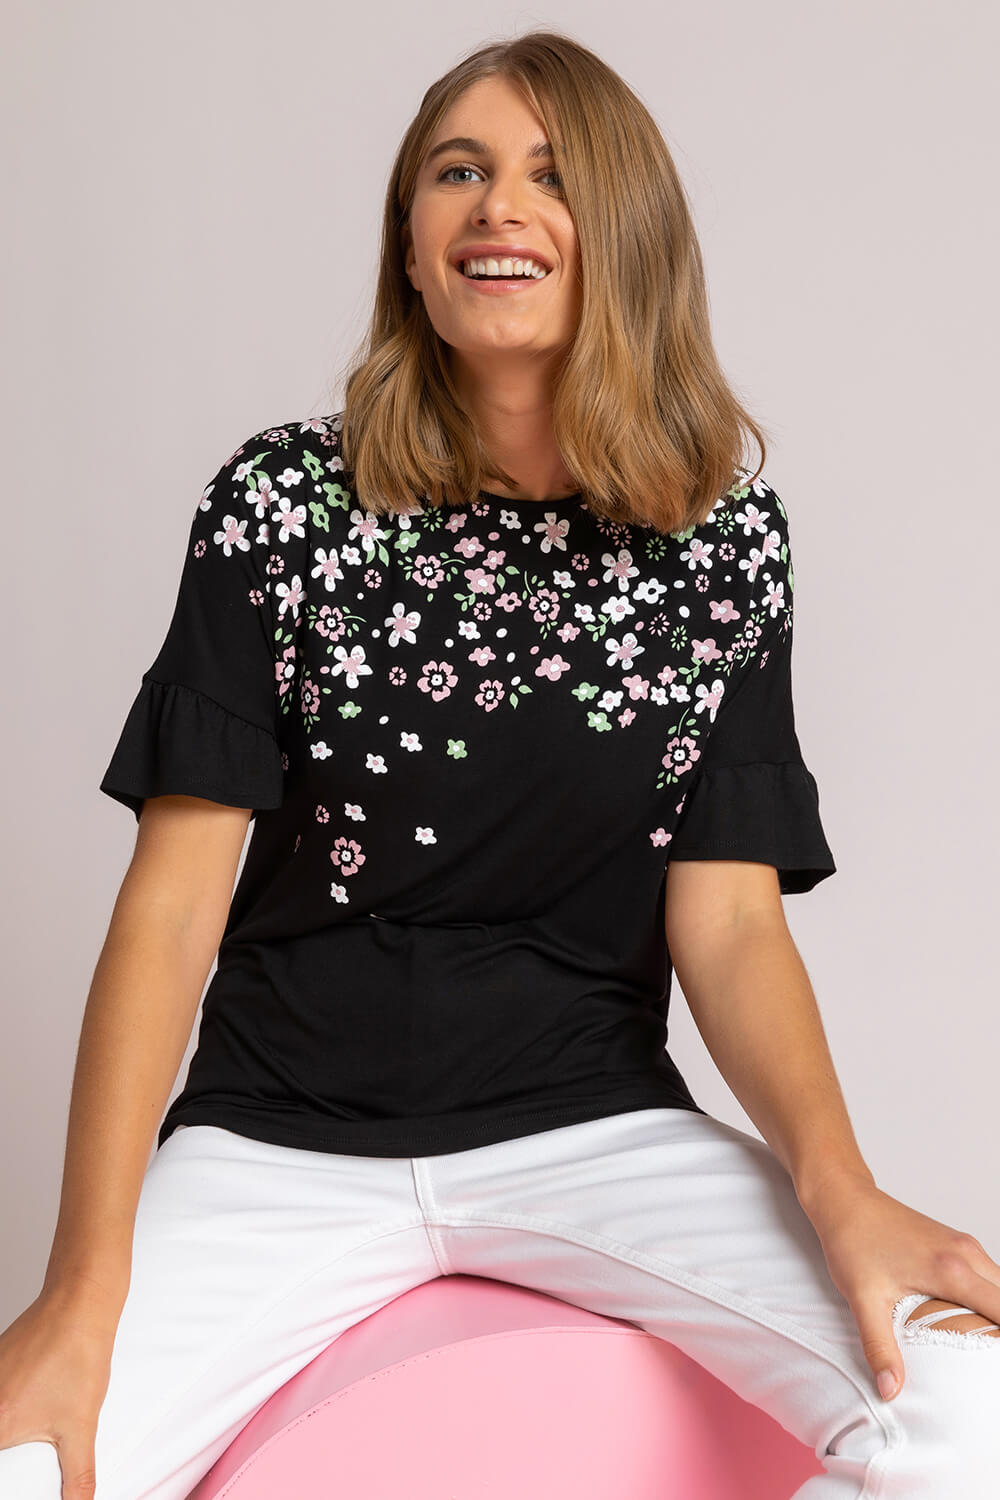 Black Floral Print Frill Sleeve Top, Image 5 of 5